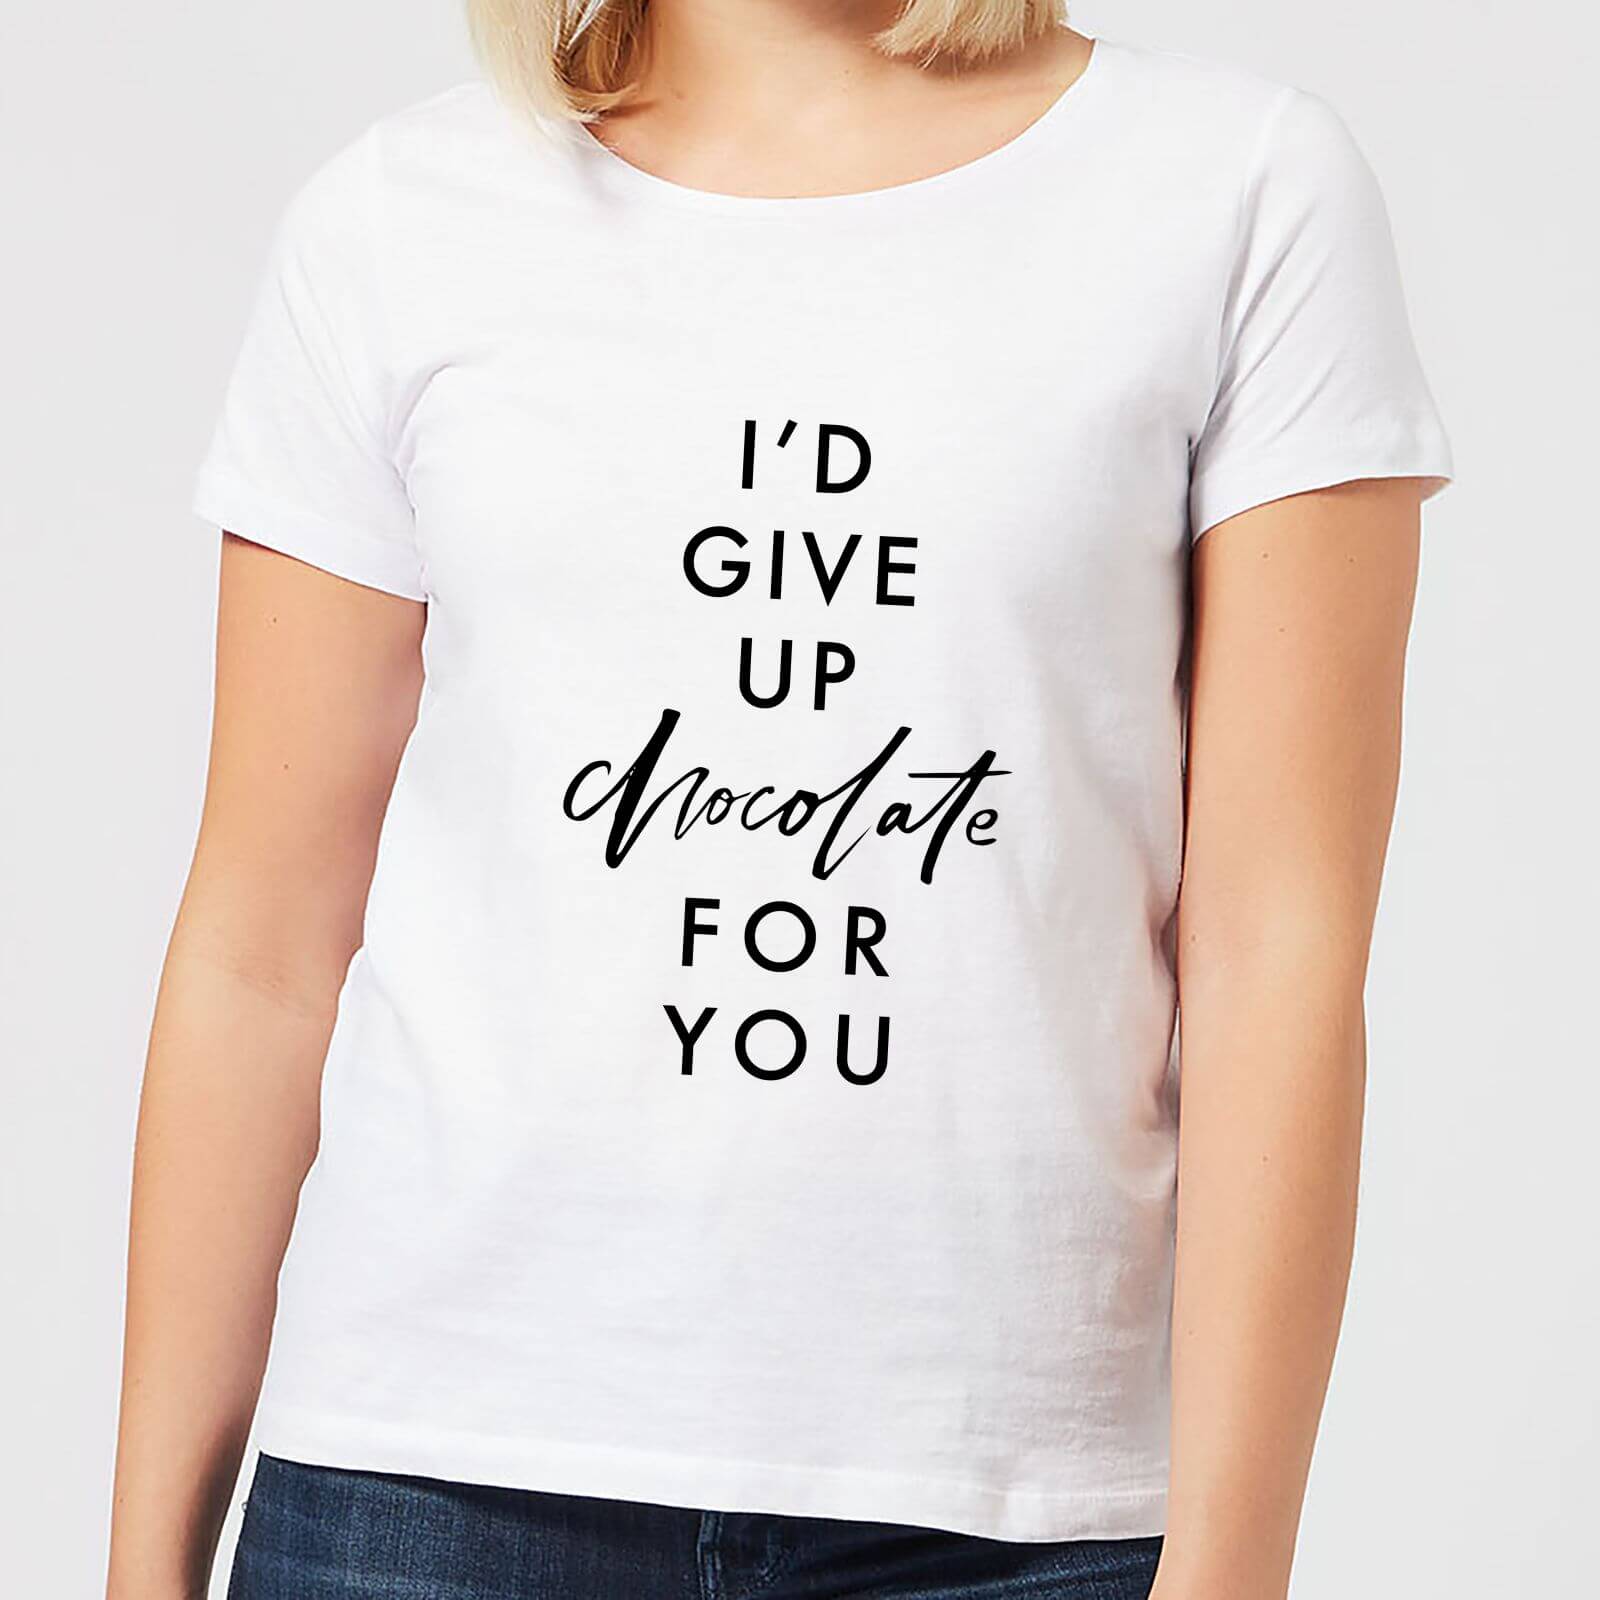 I'd Give Up Chocolate for You Women's T-Shirt - White - S - White